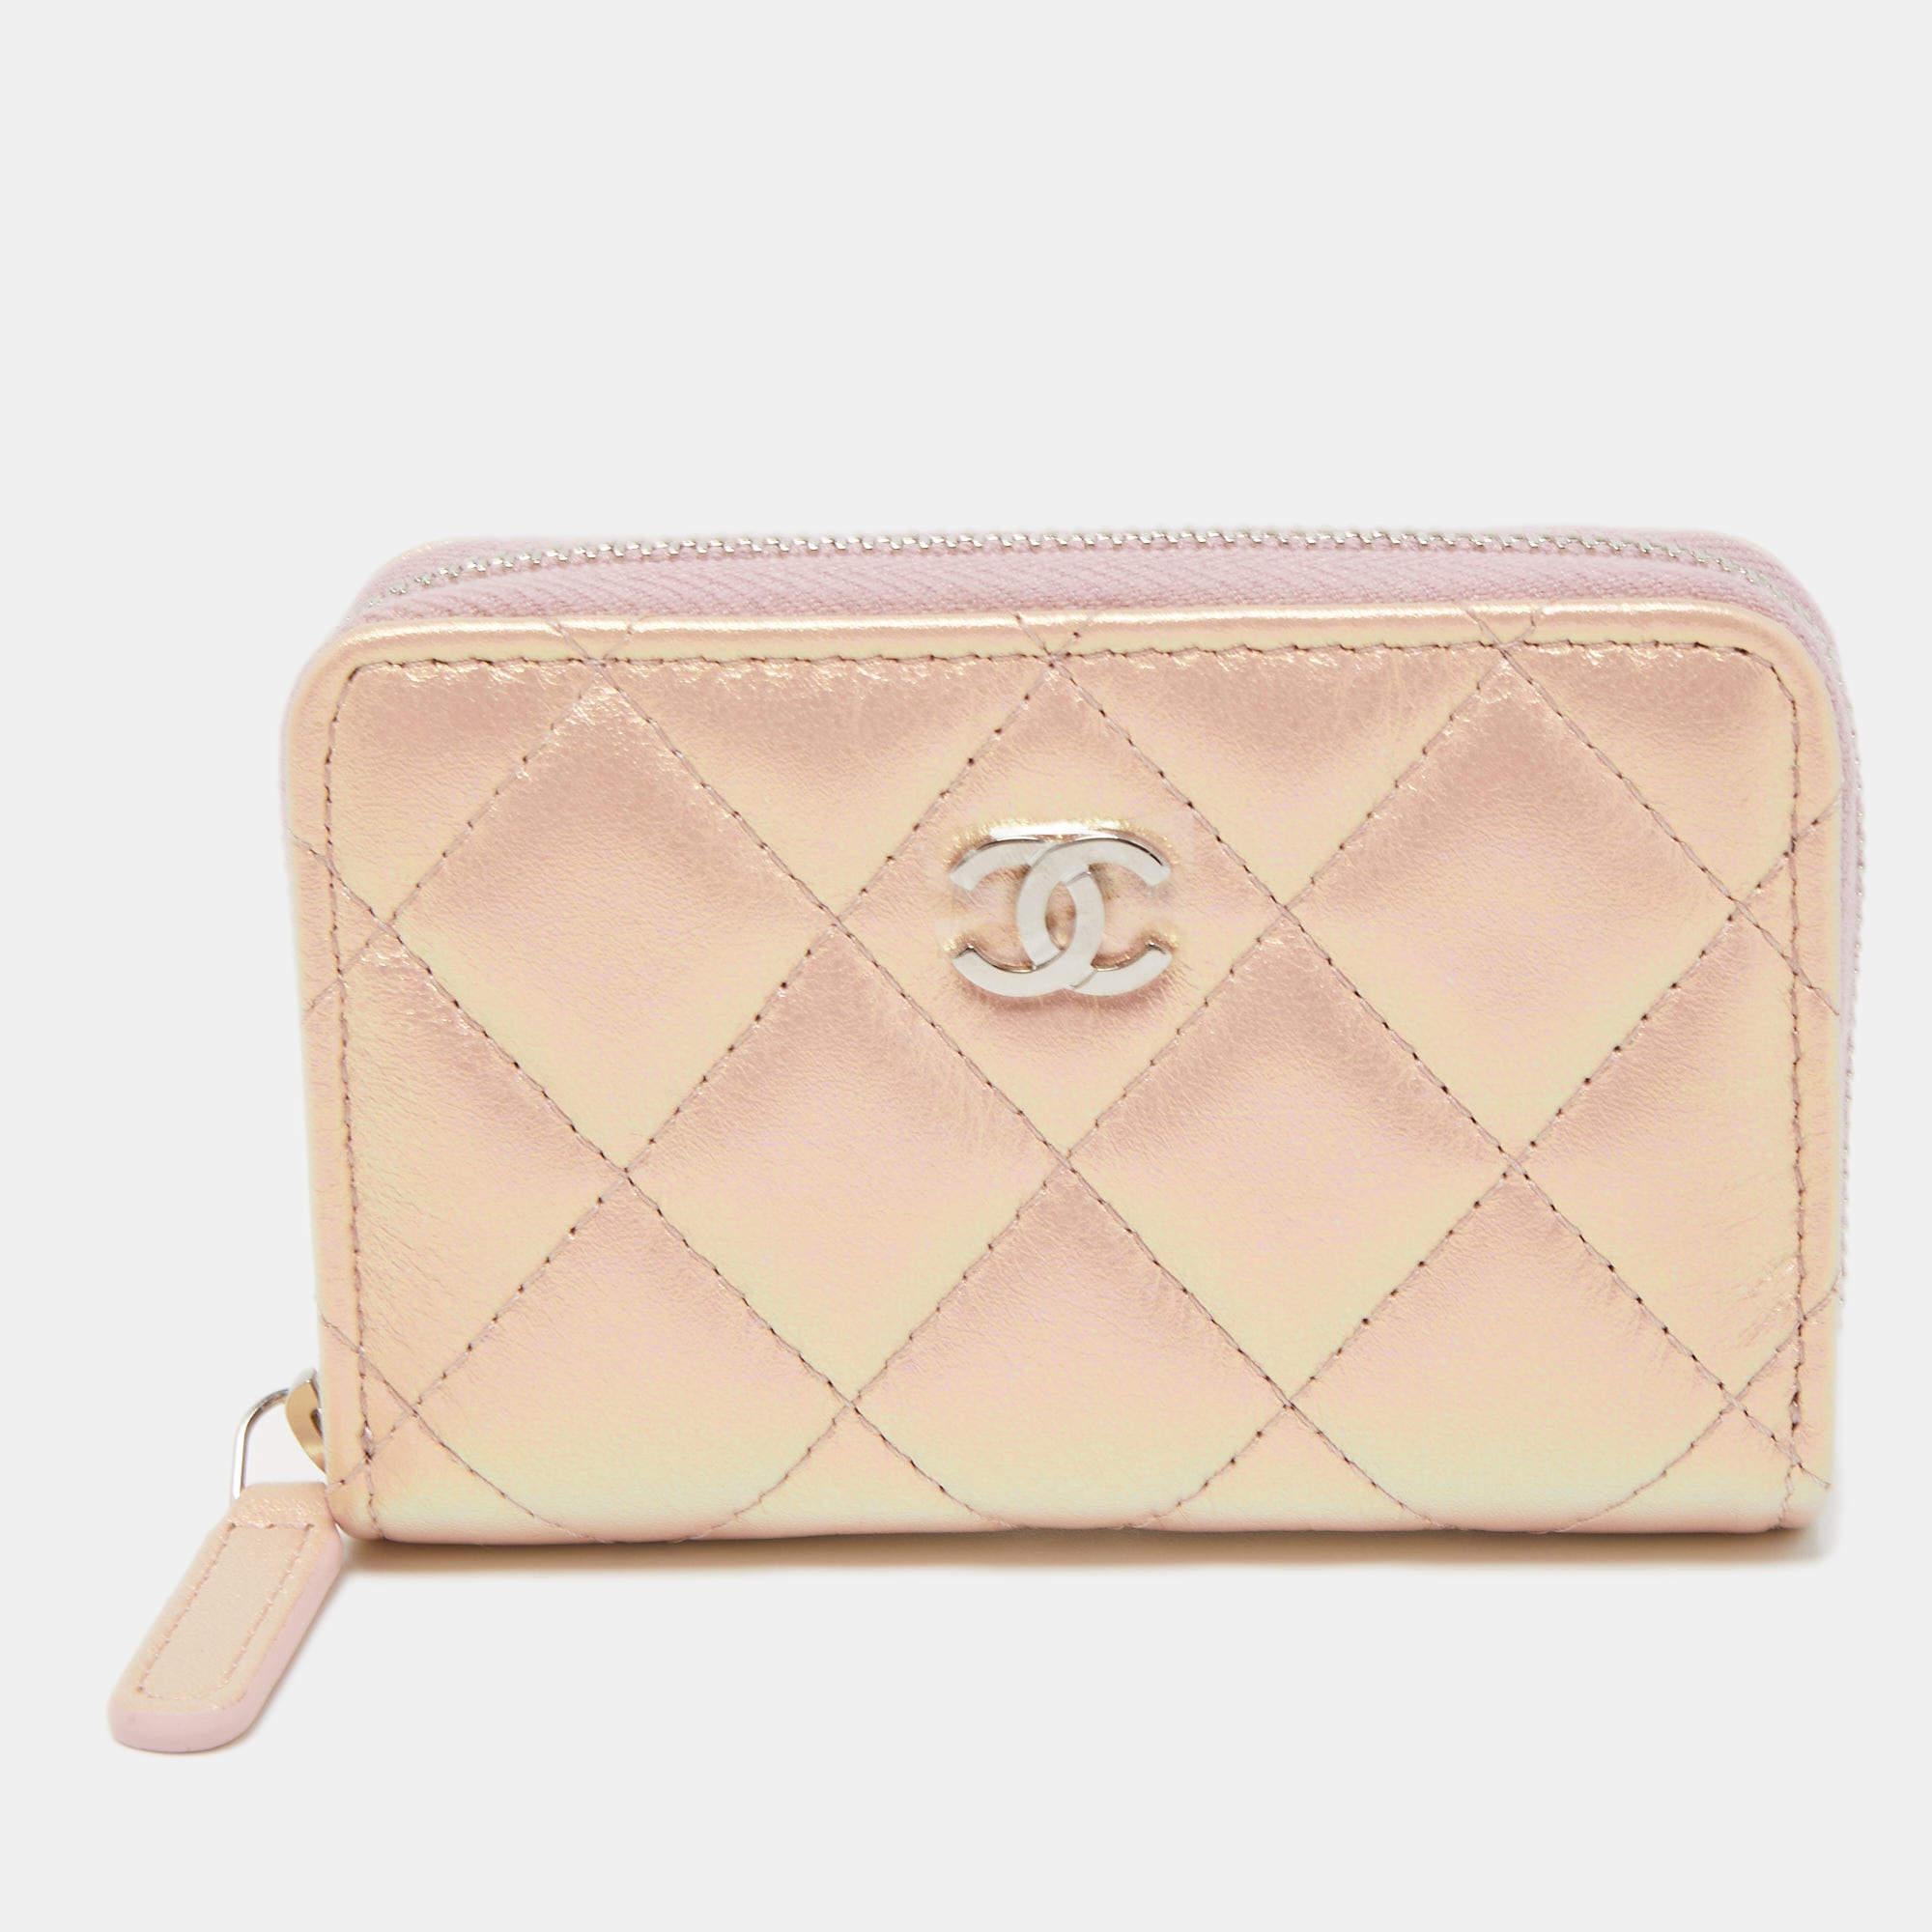 Keep all your change in one place so you do not have to go to the depths of your bag in search for it every time. Chanel brings you this stunning coin purse for exactly that purpose. Crafted from stunning pink quilted Caviar leather, this purse